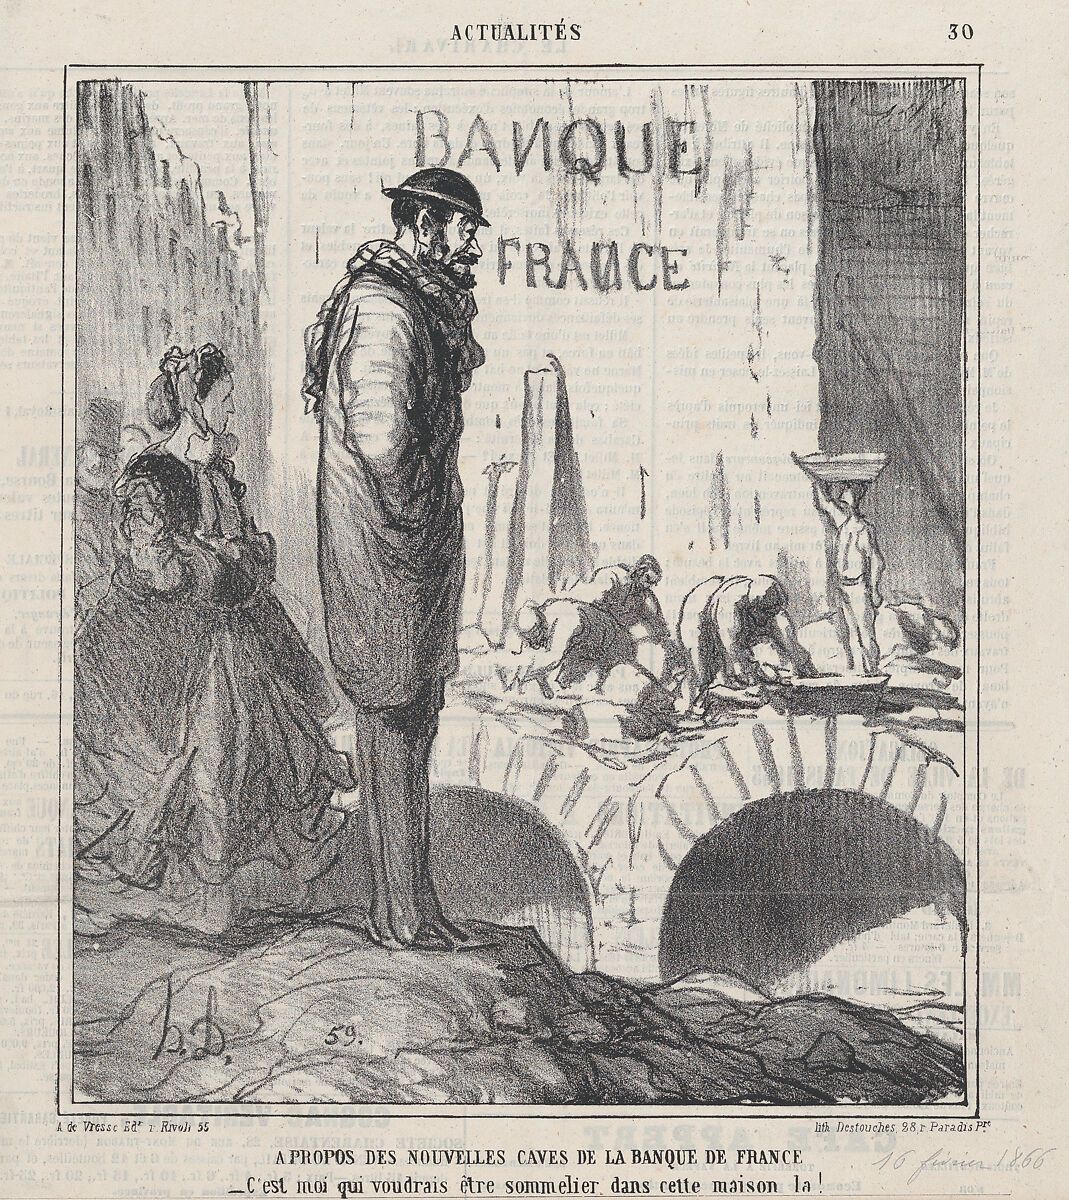 About the Bank of France's new cellars: I wouldn't mind being the sommelier in that house!, from 'News of the day,' published in Le Charivari, February 16, 1866, Honoré Daumier (French, Marseilles 1808–1879 Valmondois), Lithograph on newsprint; second state of two (Delteil) 